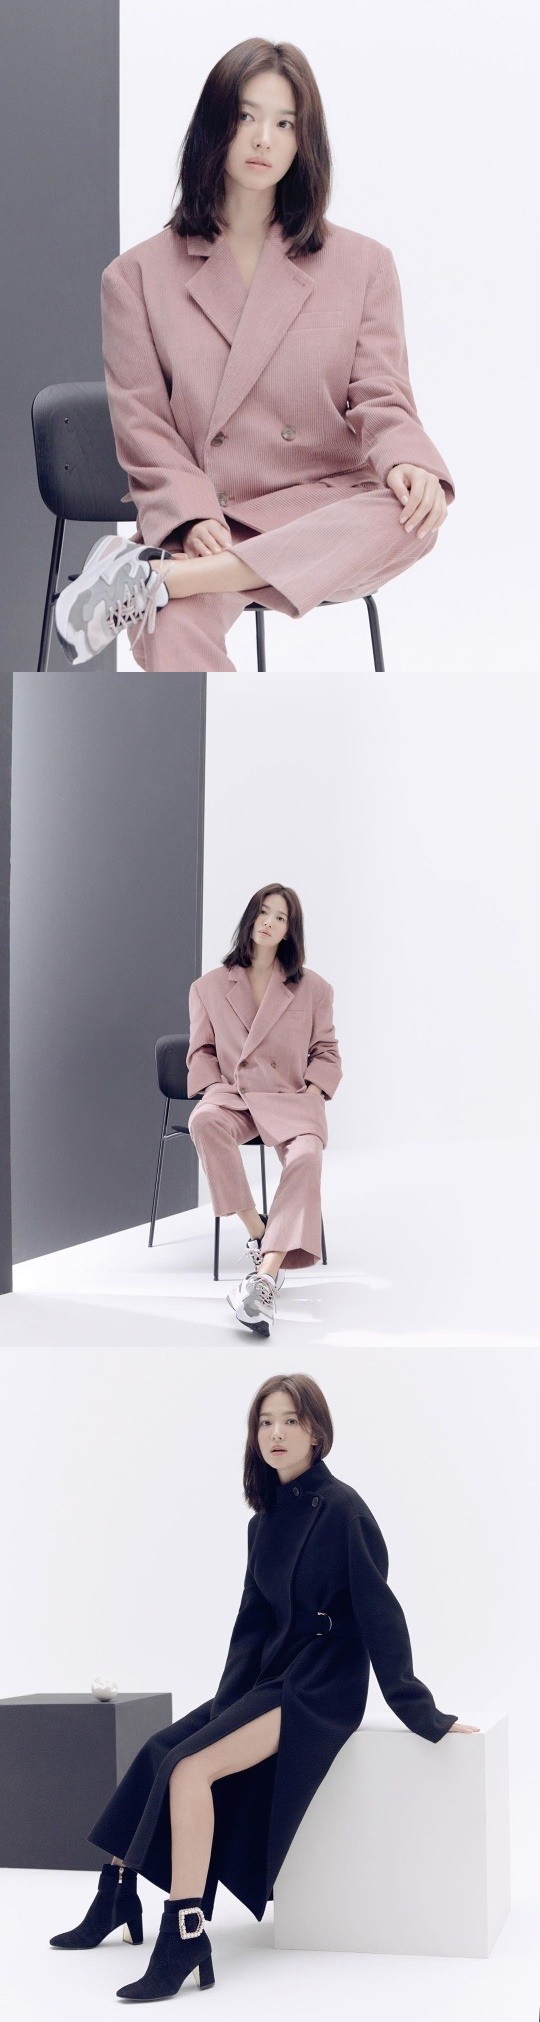 Actor Song Hye-kyo shows off her Luxury Beautiful looksOn the 26th, Actor Song Hye-kyo released a picture of his current situation through his Instagram.In the photo, Song Hye-kyo shows off her casual charm by matching her sneakers in a pink suit; in another photo, she showed her sexy charm with a one-piece with a side-tipped dress.On the other hand, Song Hye-kyo played the role of Cha Soo-hyun in the TVN drama Boyfriend which ended in January.Photo: Instagram